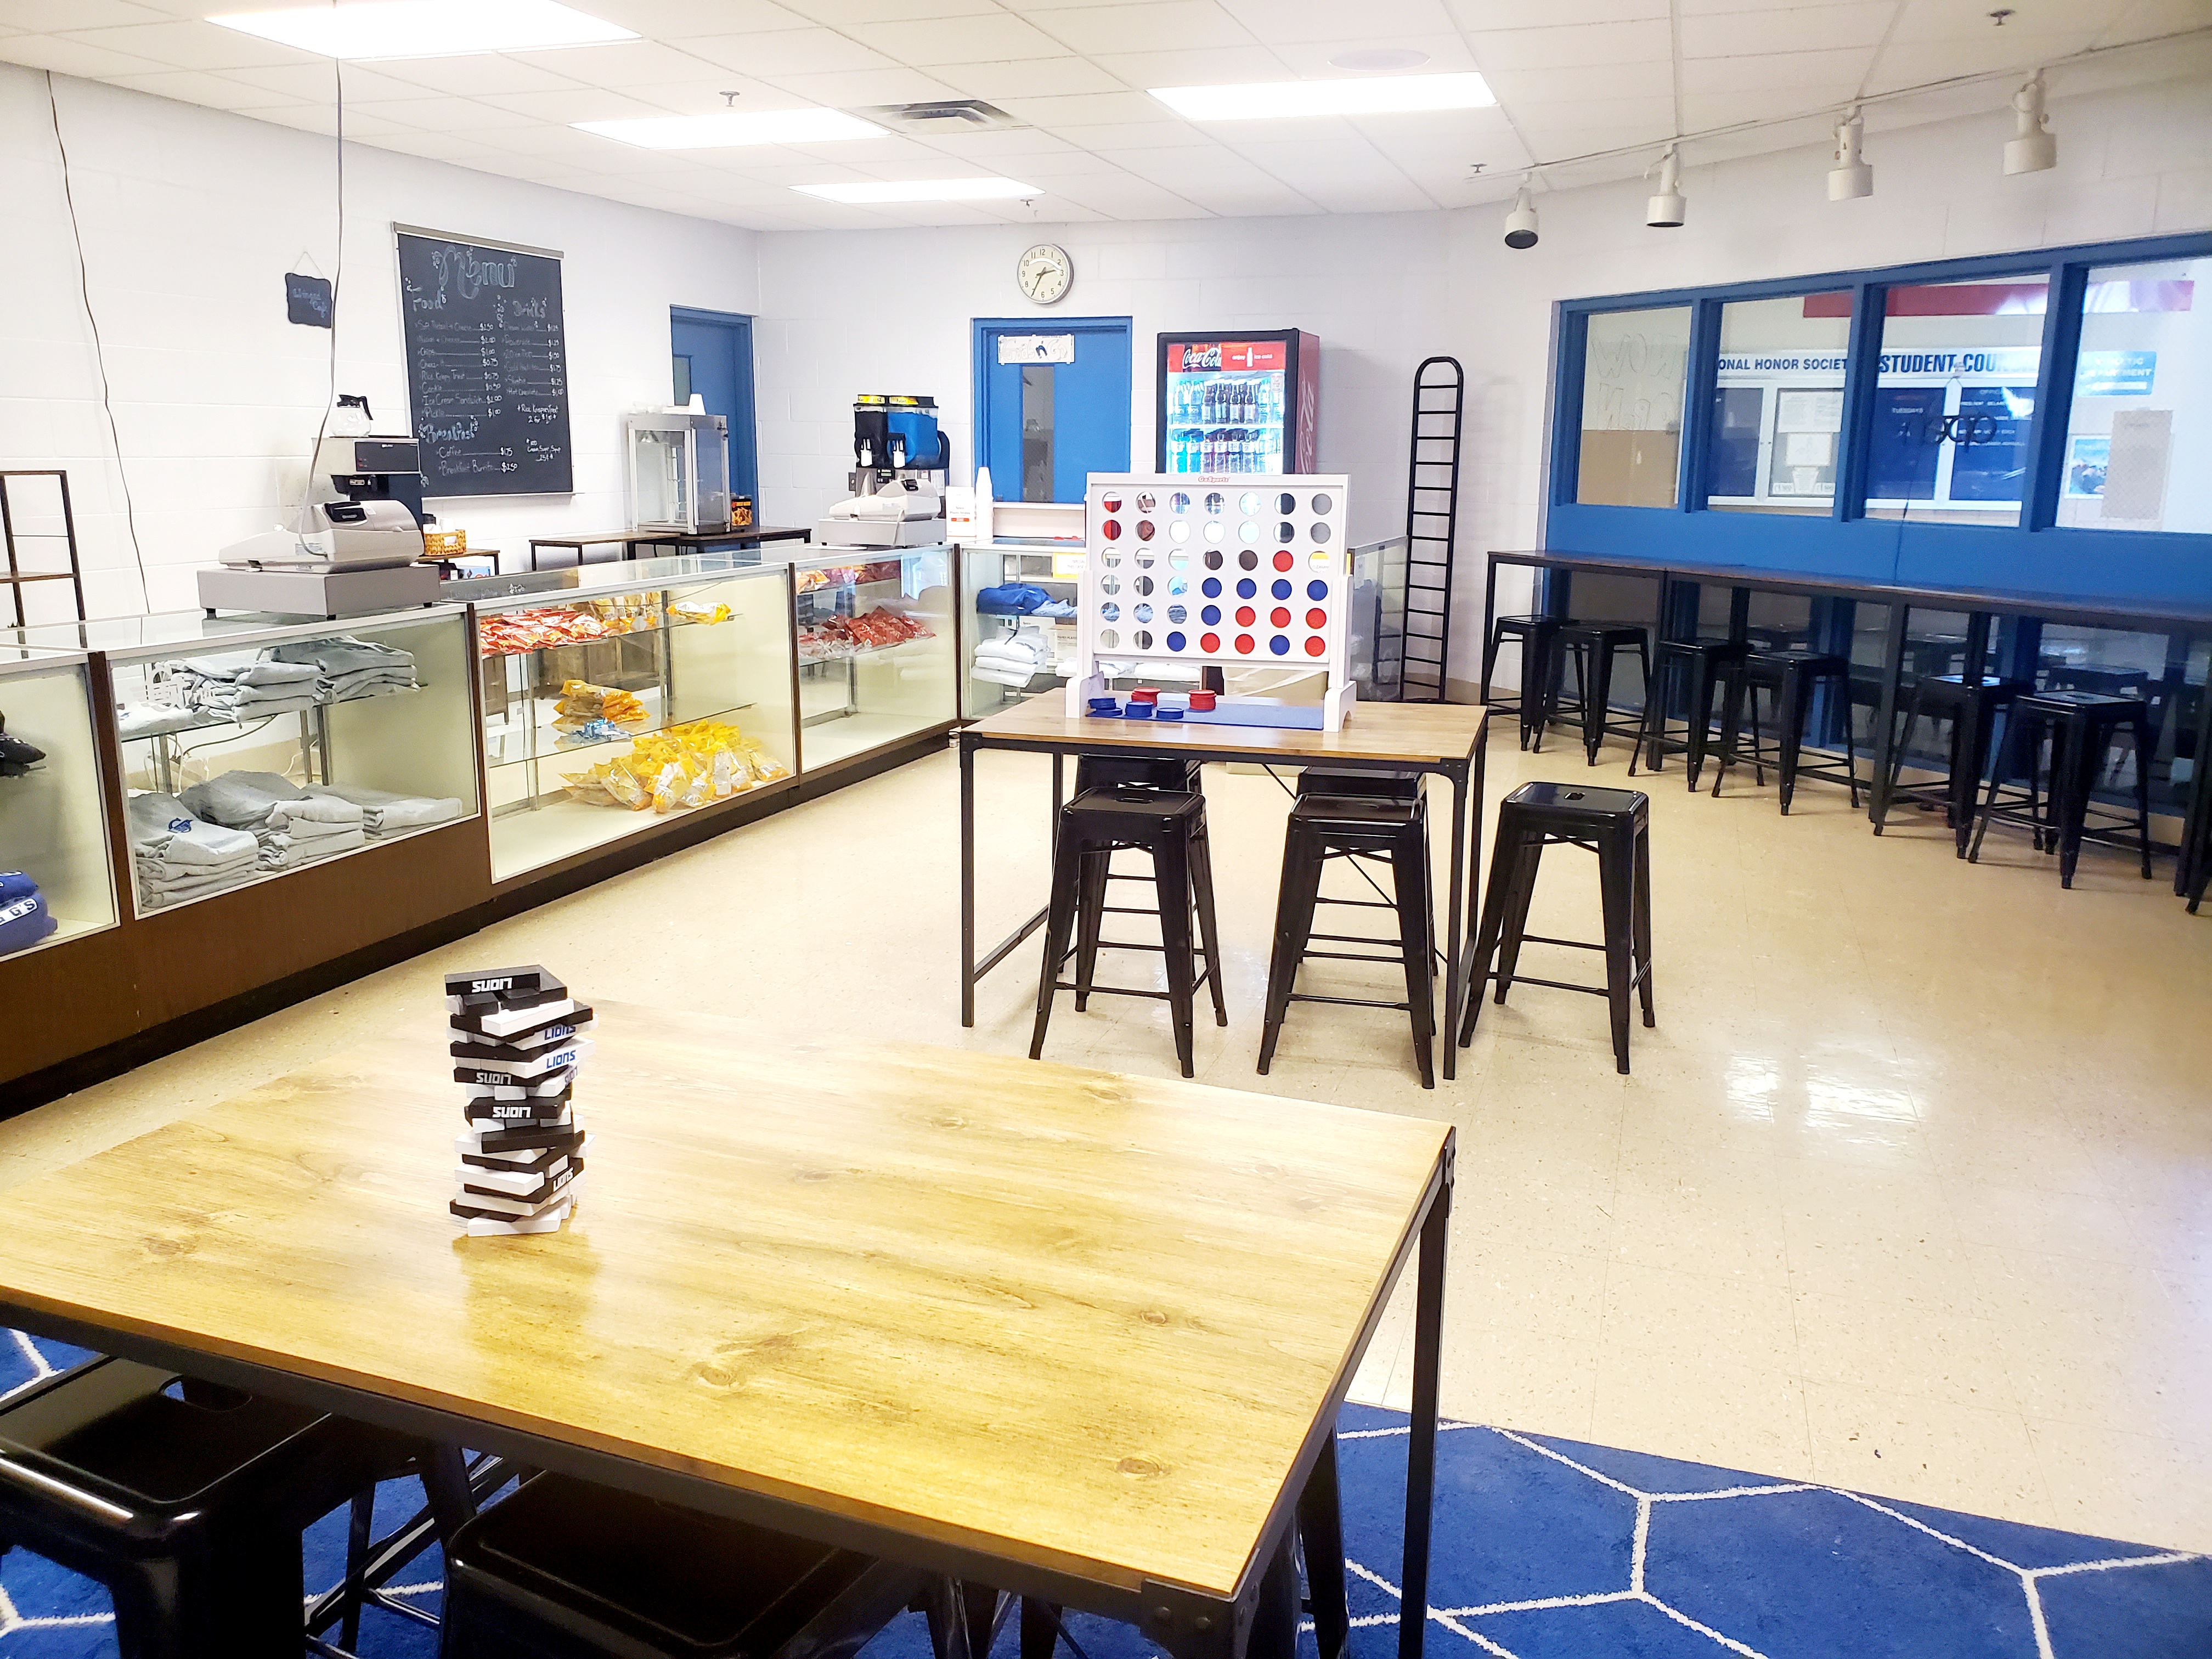 The Nest is our school store at Gladwin High School. Open daily at lunch for pretzels, nachos, slushies, and other treats. The Nest is now open before school for coffee. Get your favorite treats or Flying G apparel. Stop in!